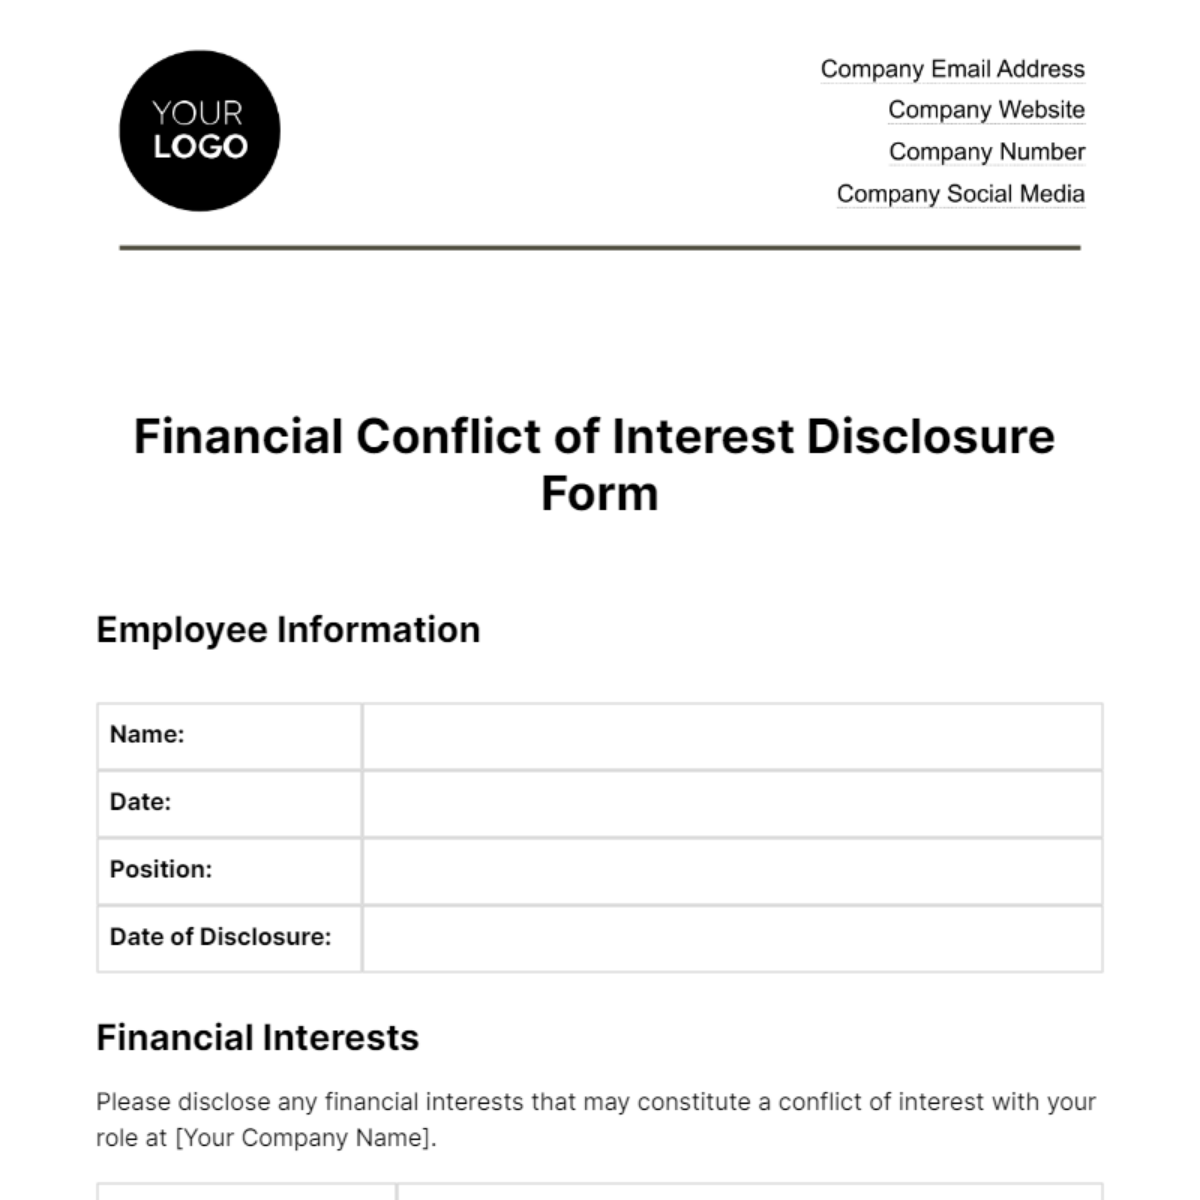 Free Financial Conflict of Interest Disclosure Form Template